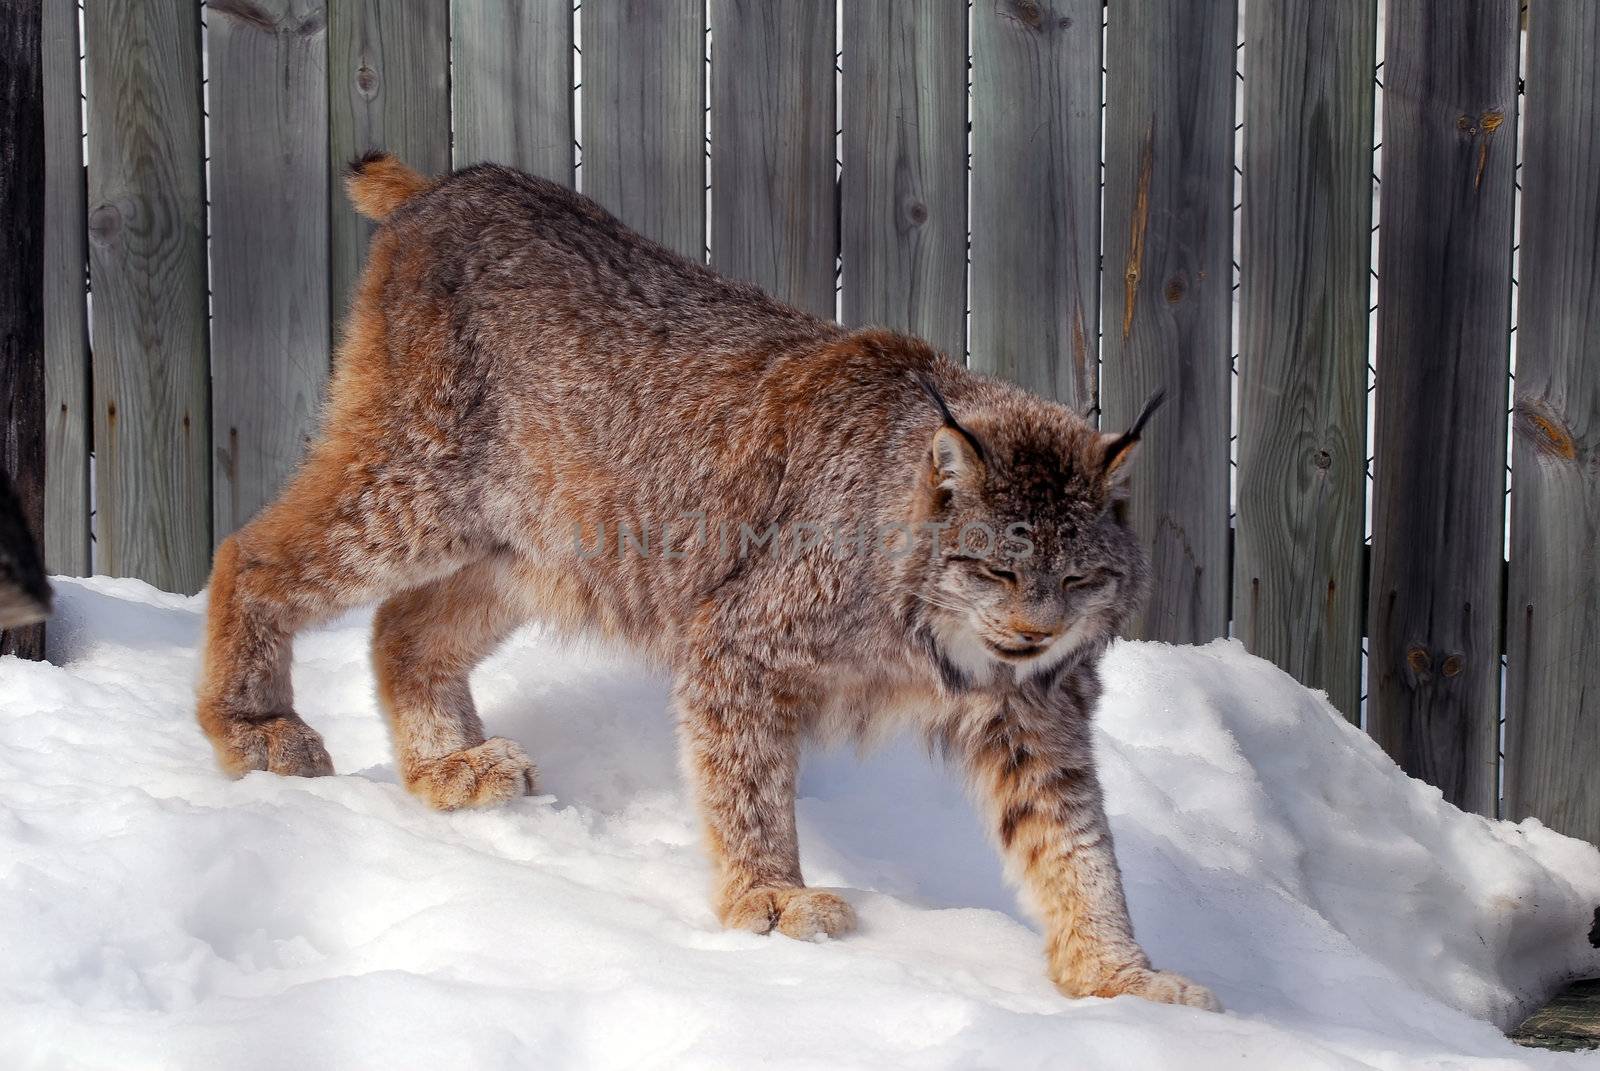 Close-up picture of a canada Lynx in captivity